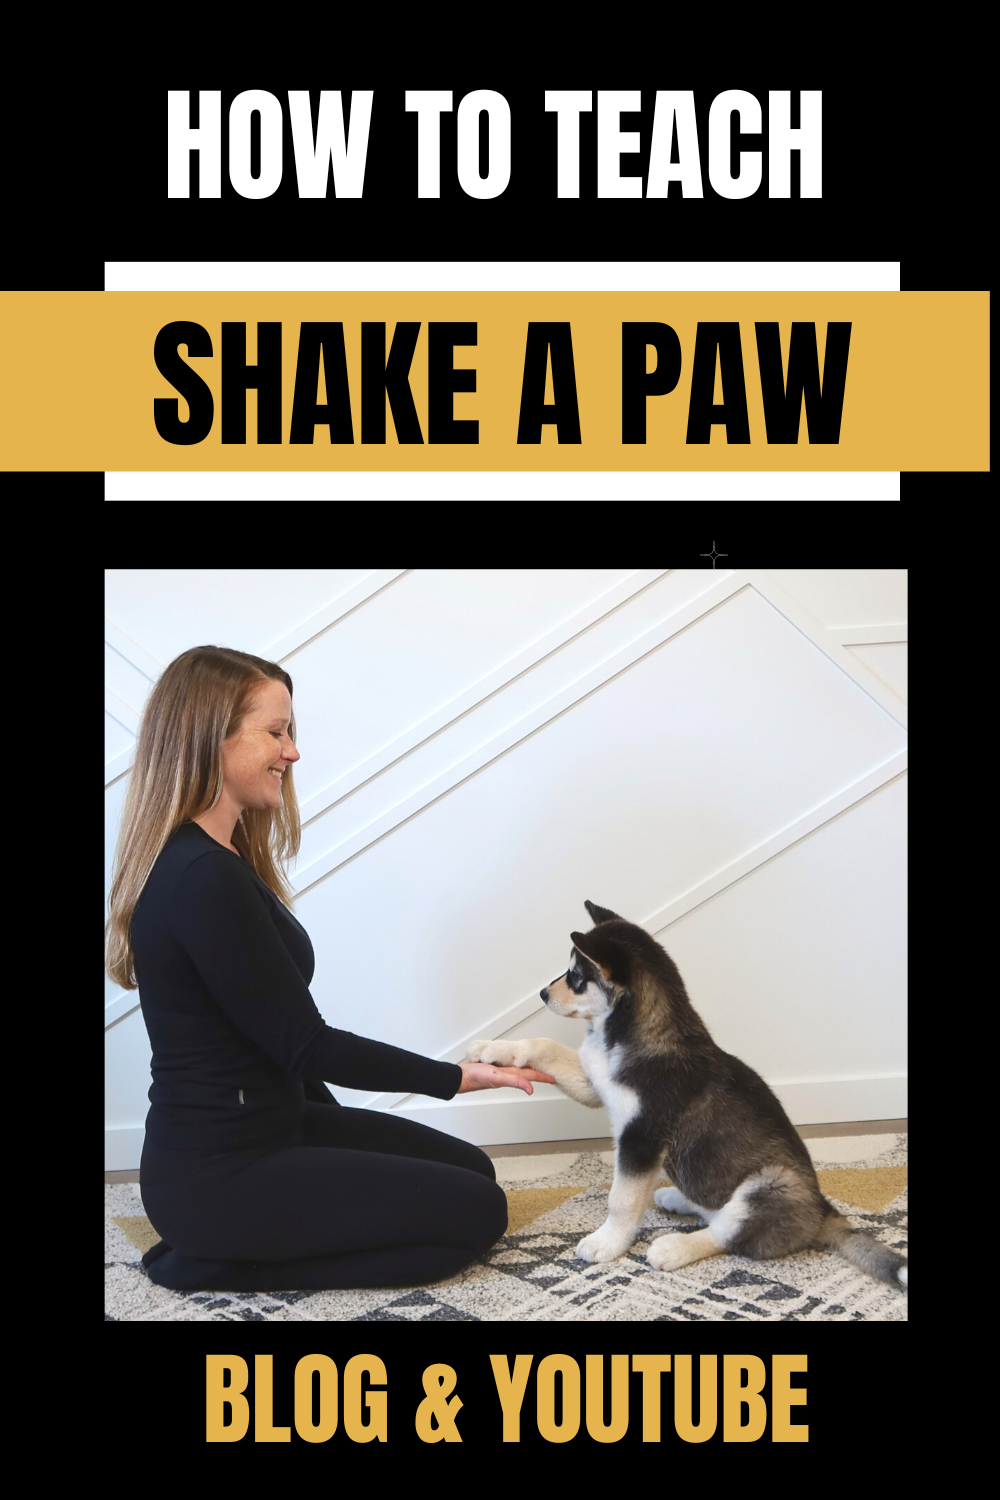 How to teach your dog to shake a paw